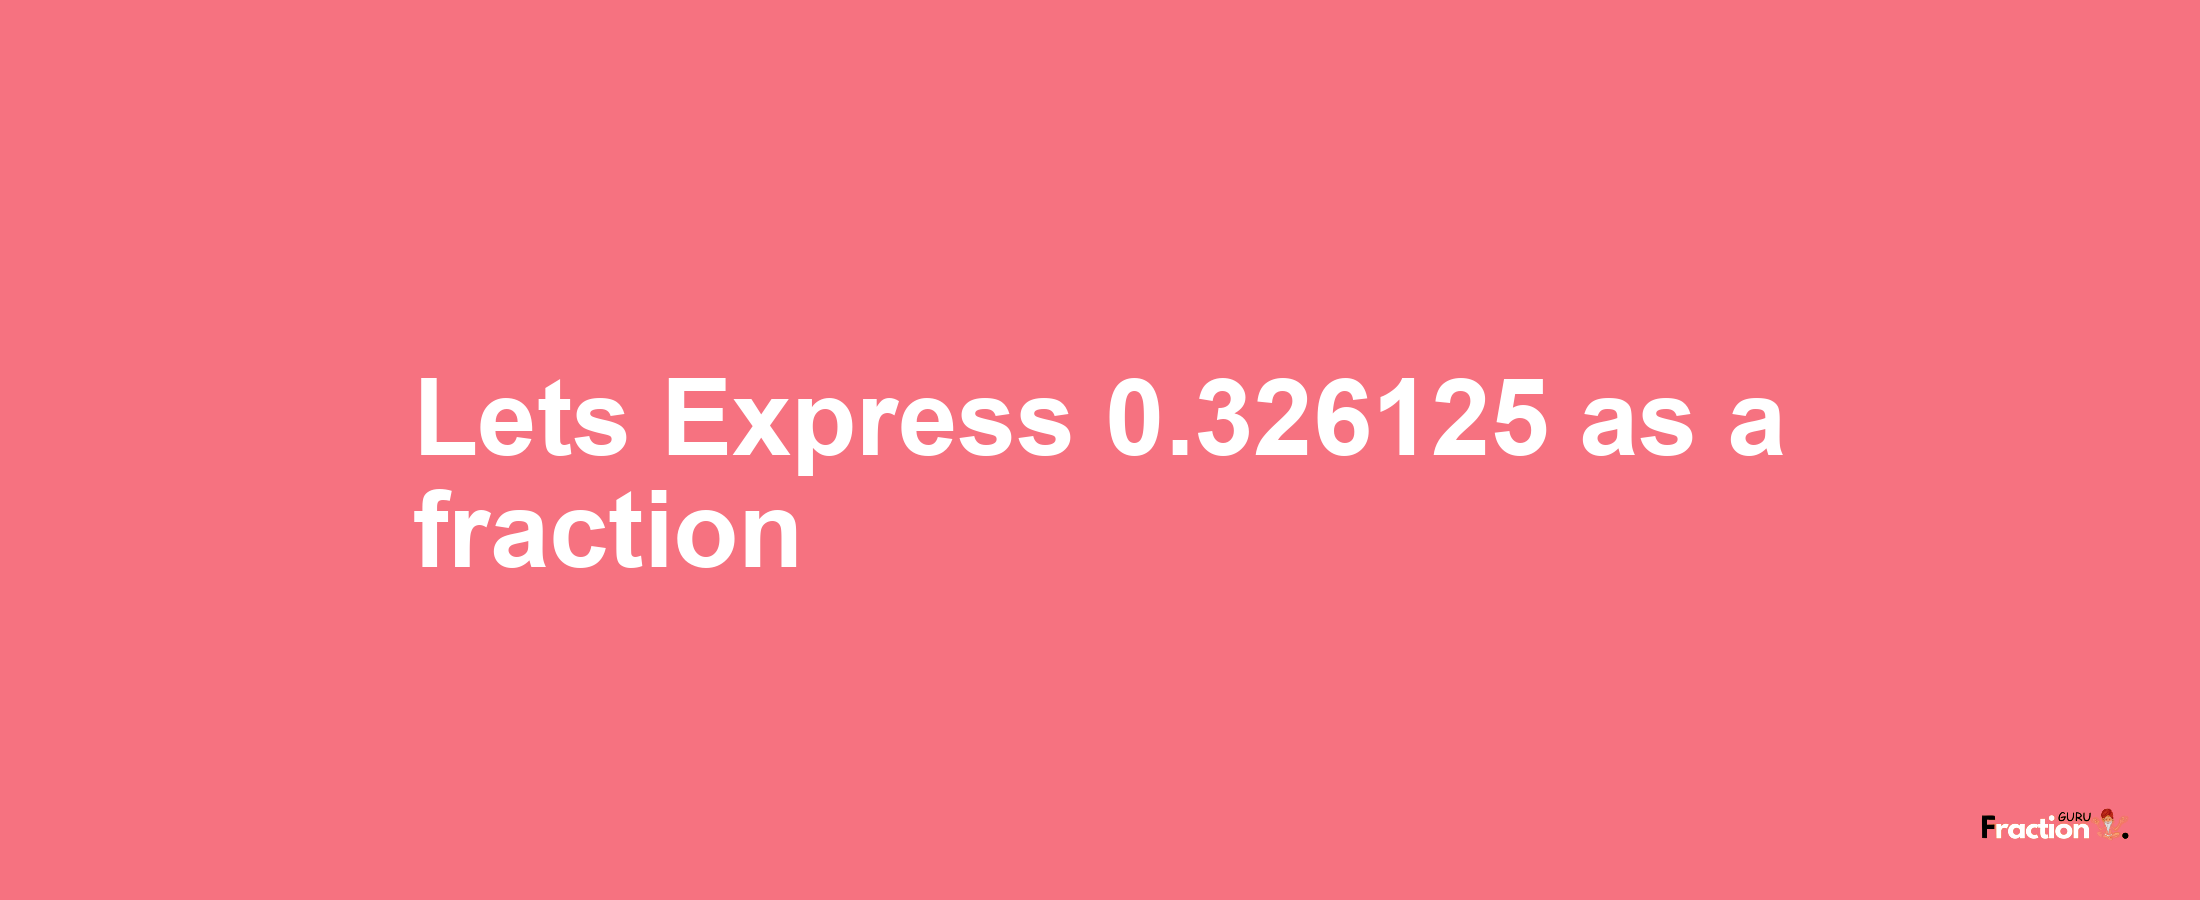 Lets Express 0.326125 as afraction